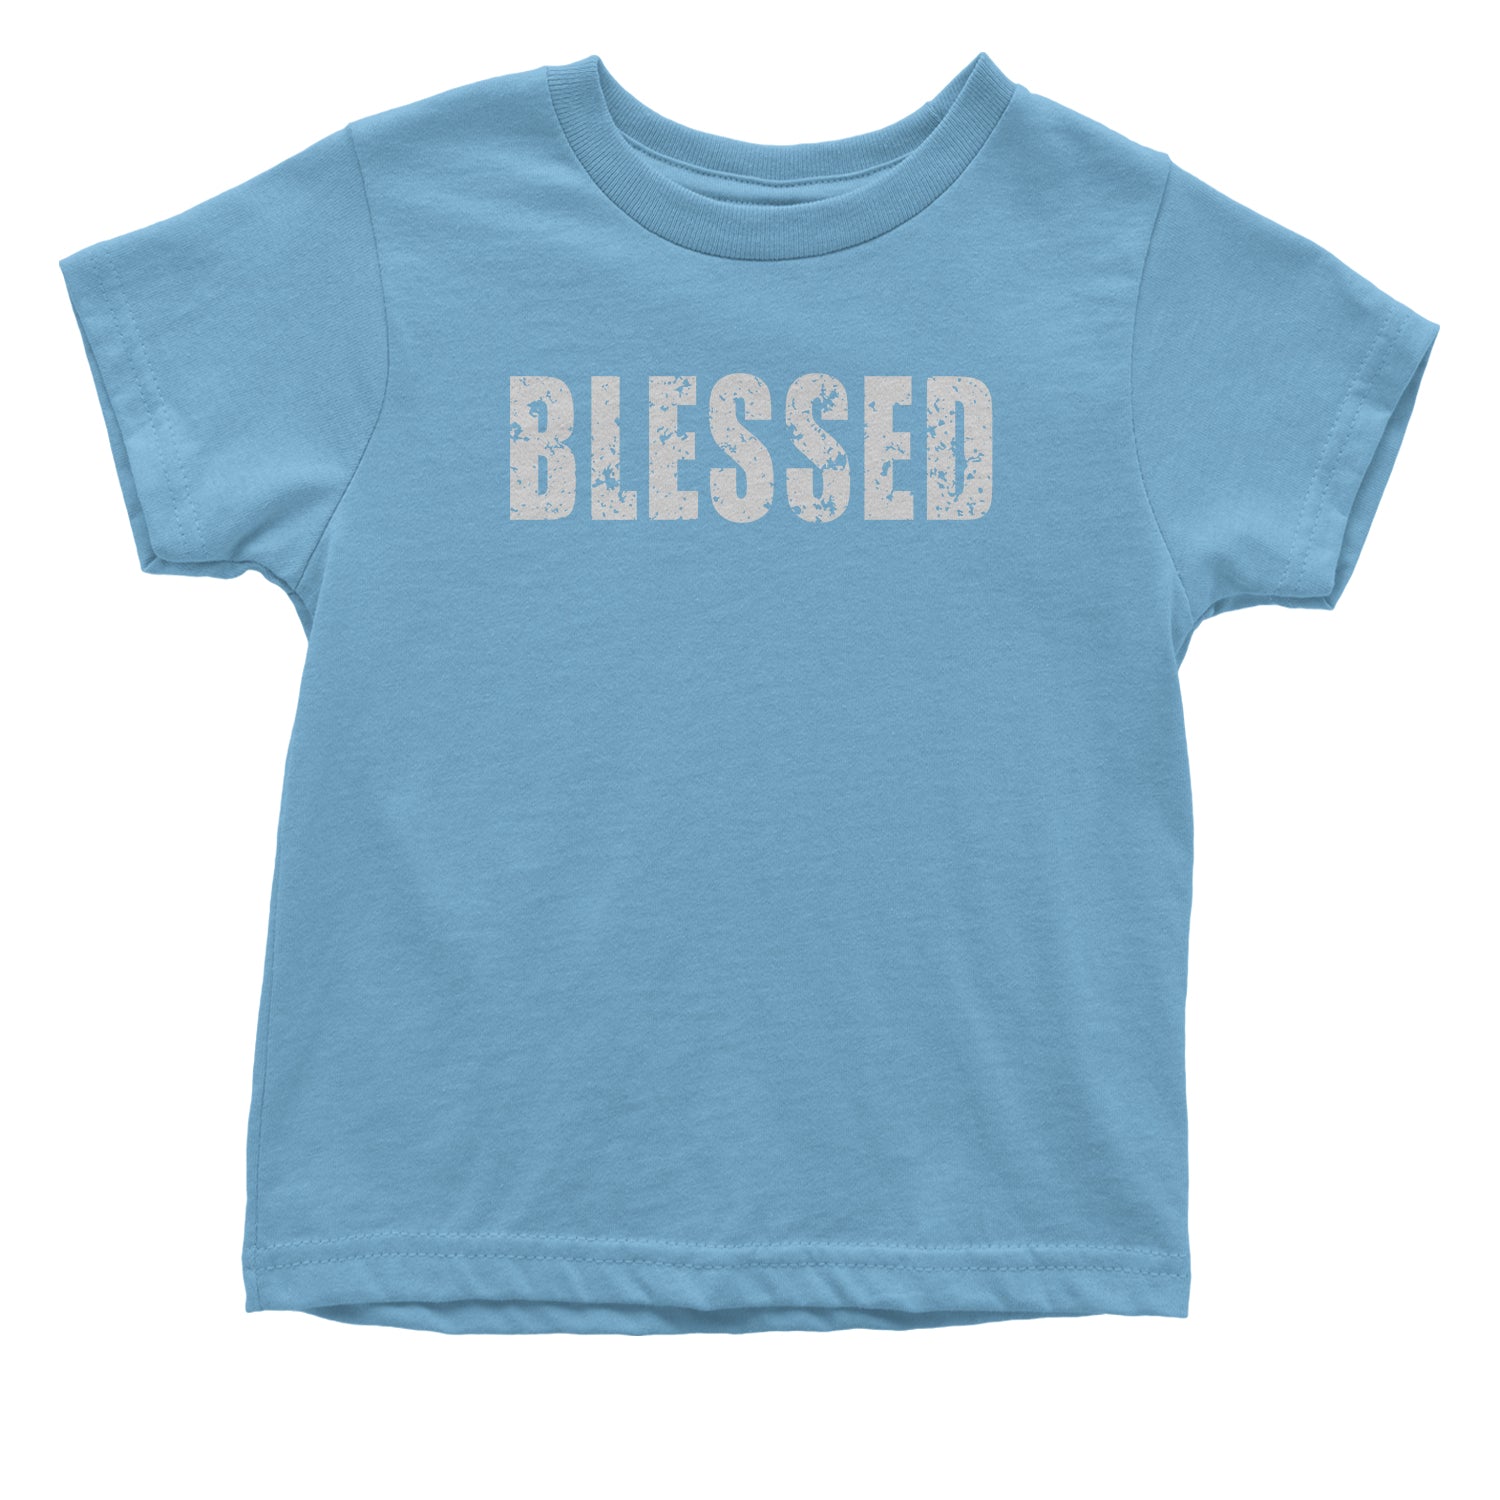 Blessed Religious Grateful Thankful Infant One-Piece Romper Bodysuit and Toddler T-shirt #expressiontees by Expression Tees